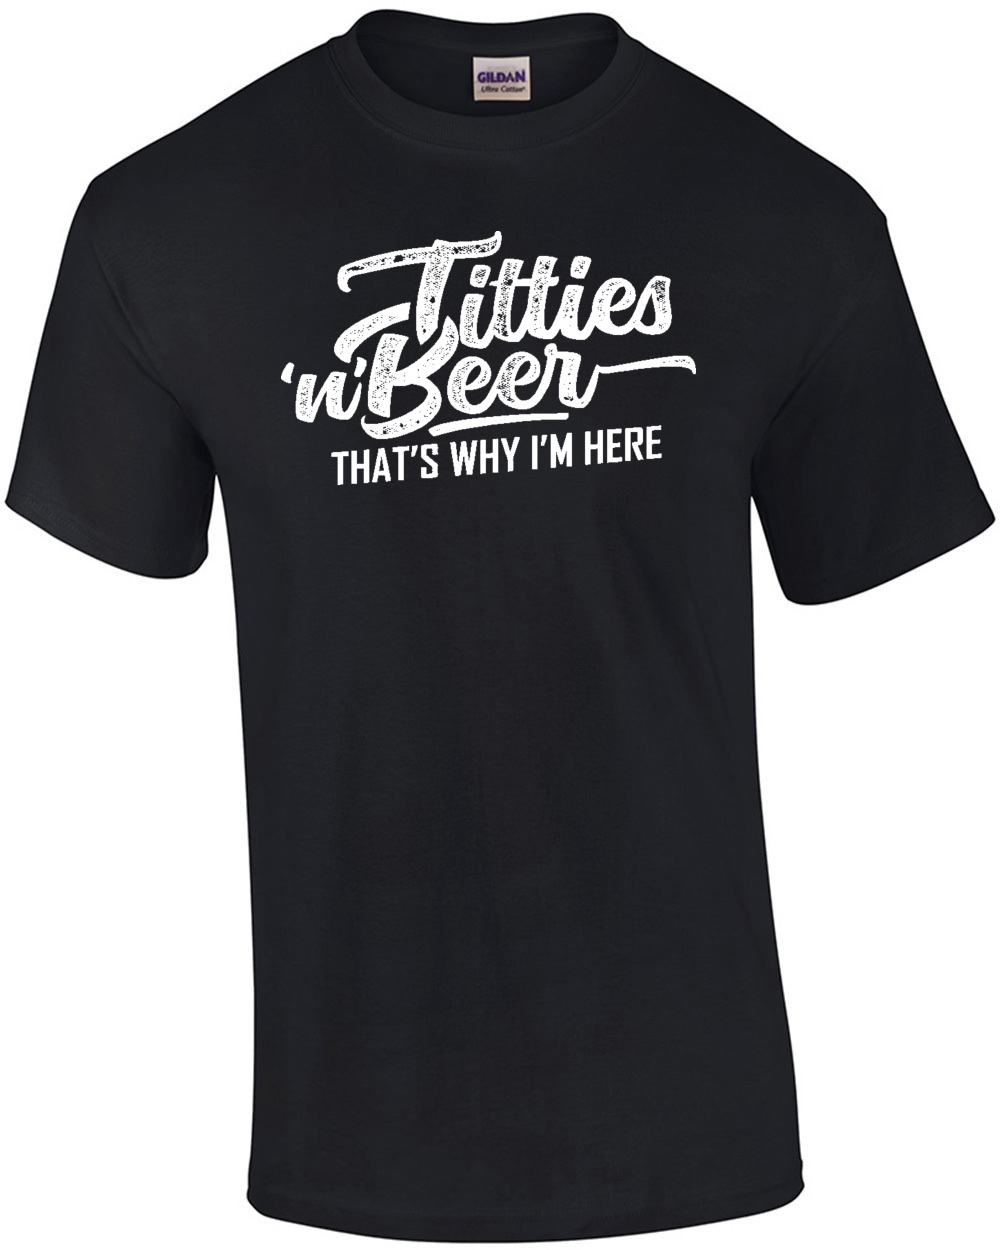 Titties And Beer Why I'm Here T-Shirt